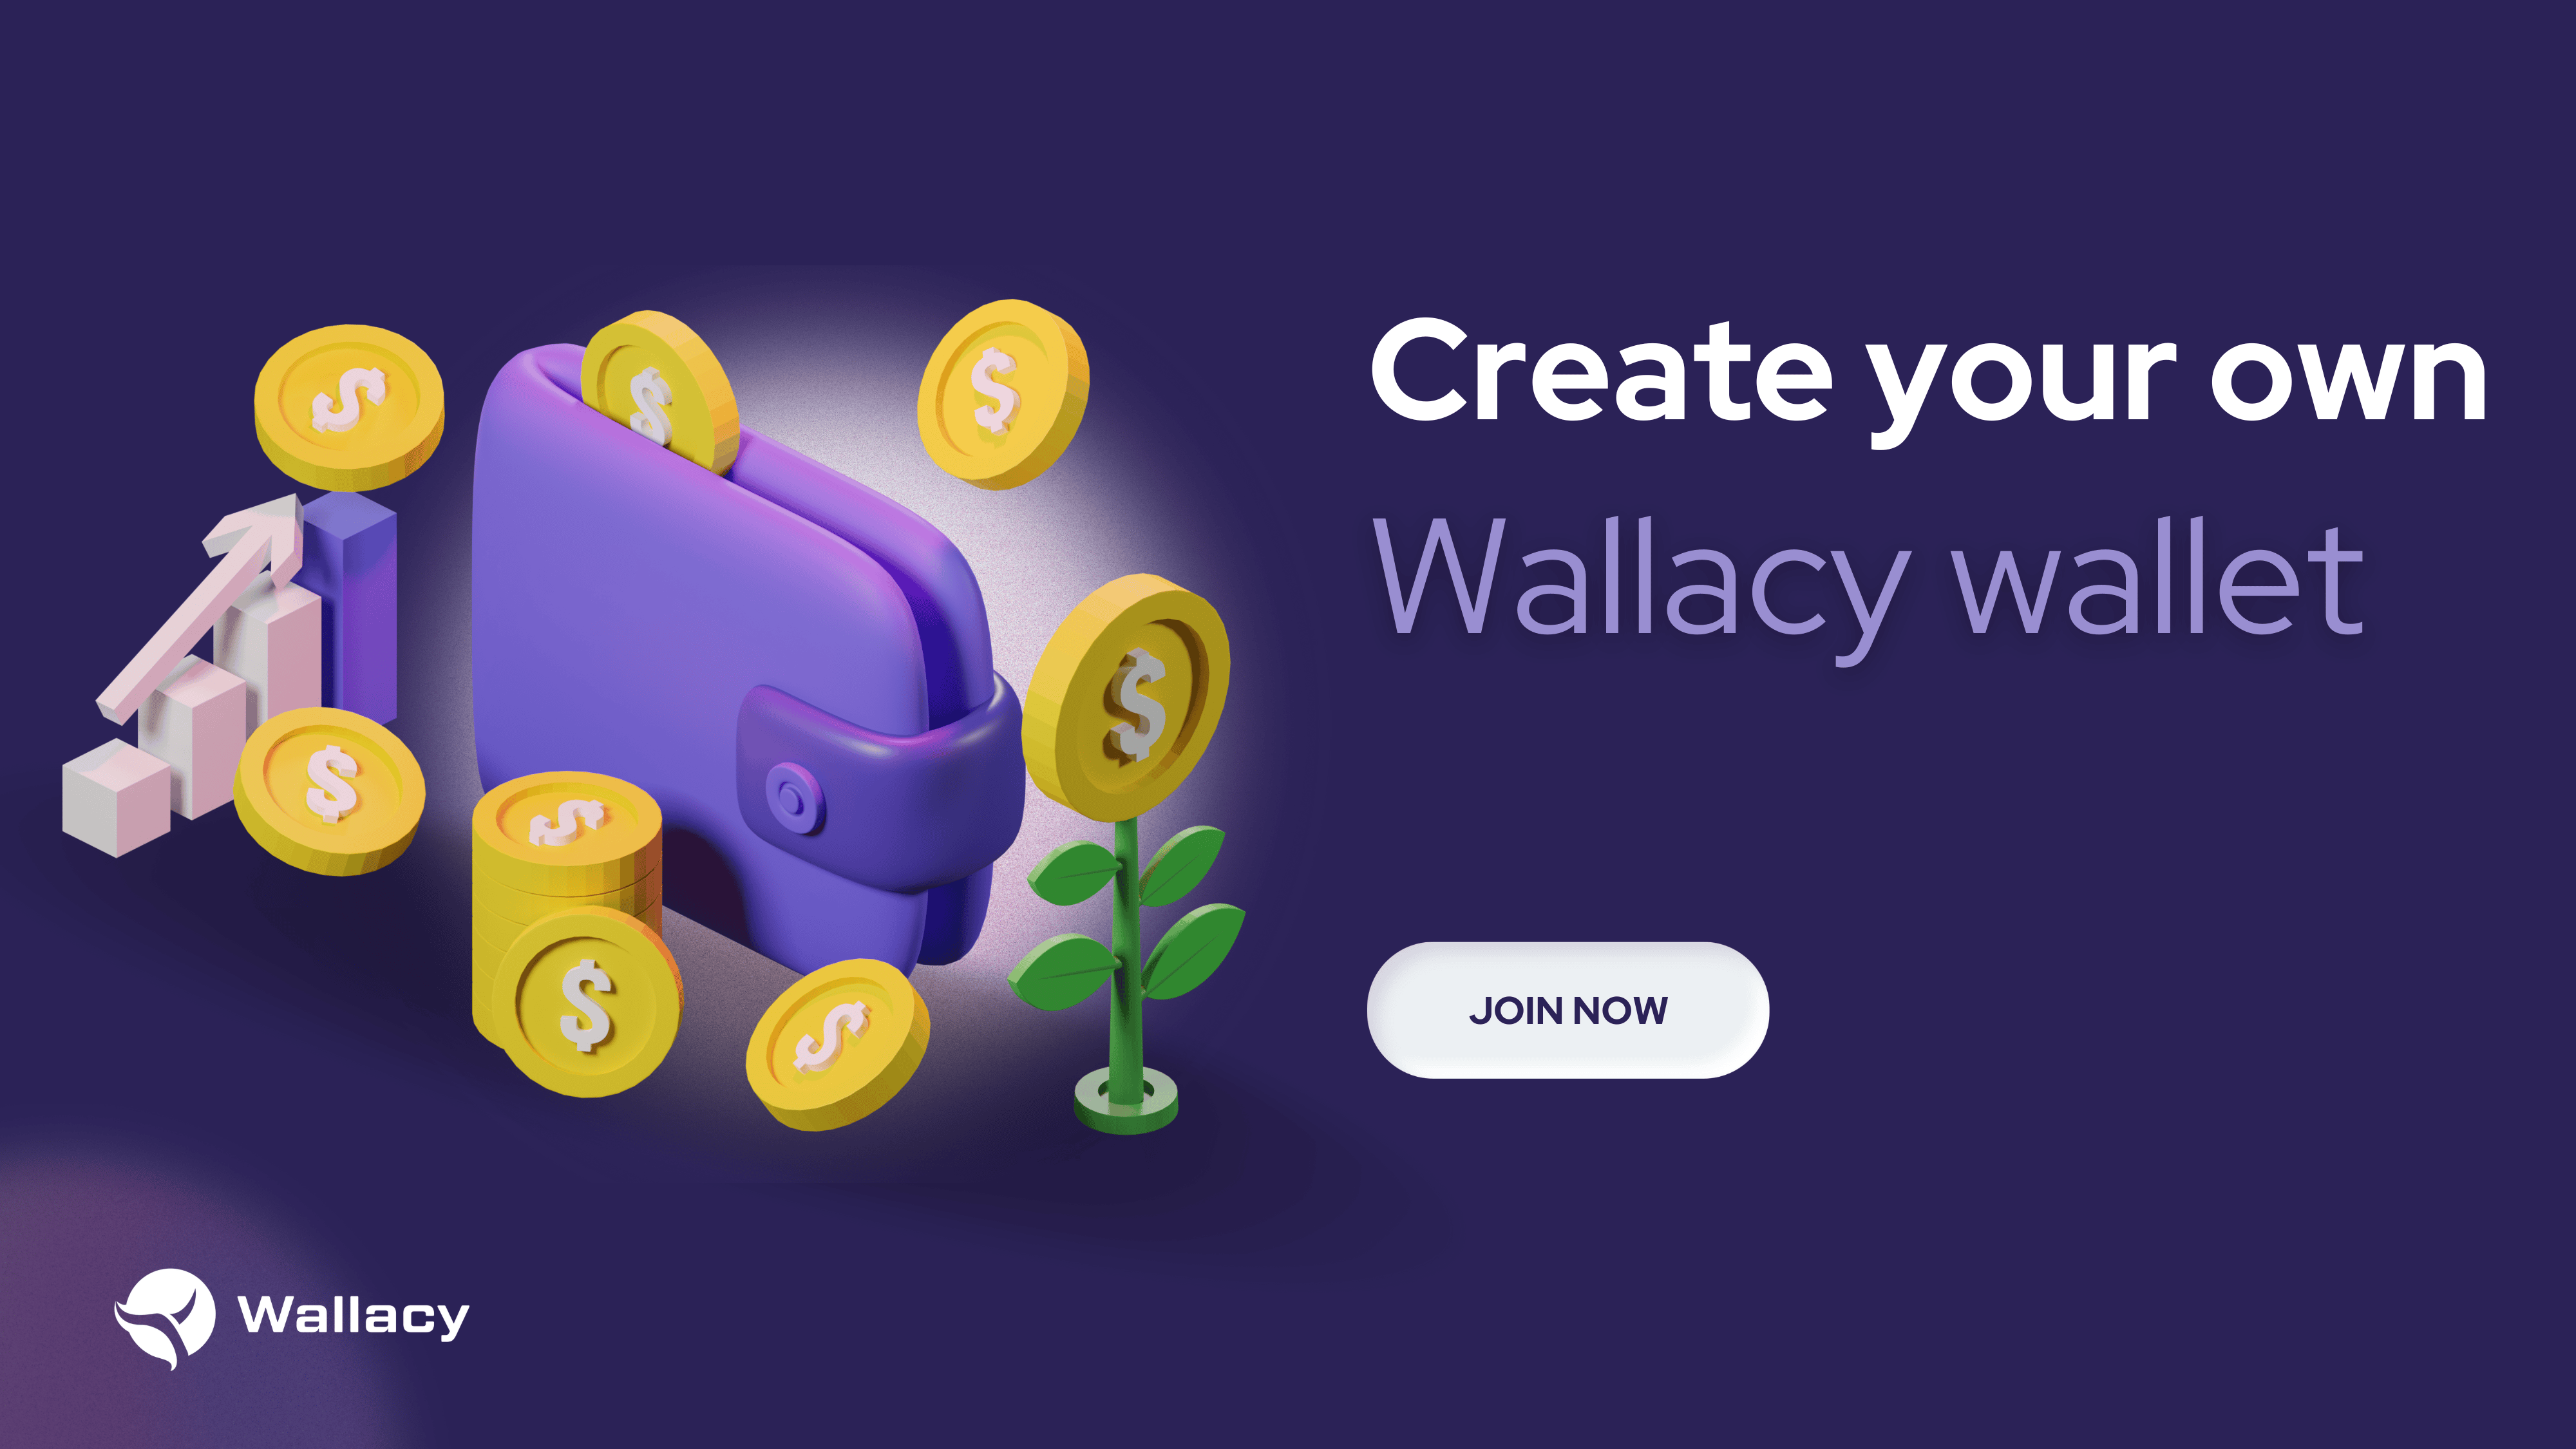 How to create a Wallacy wallet?